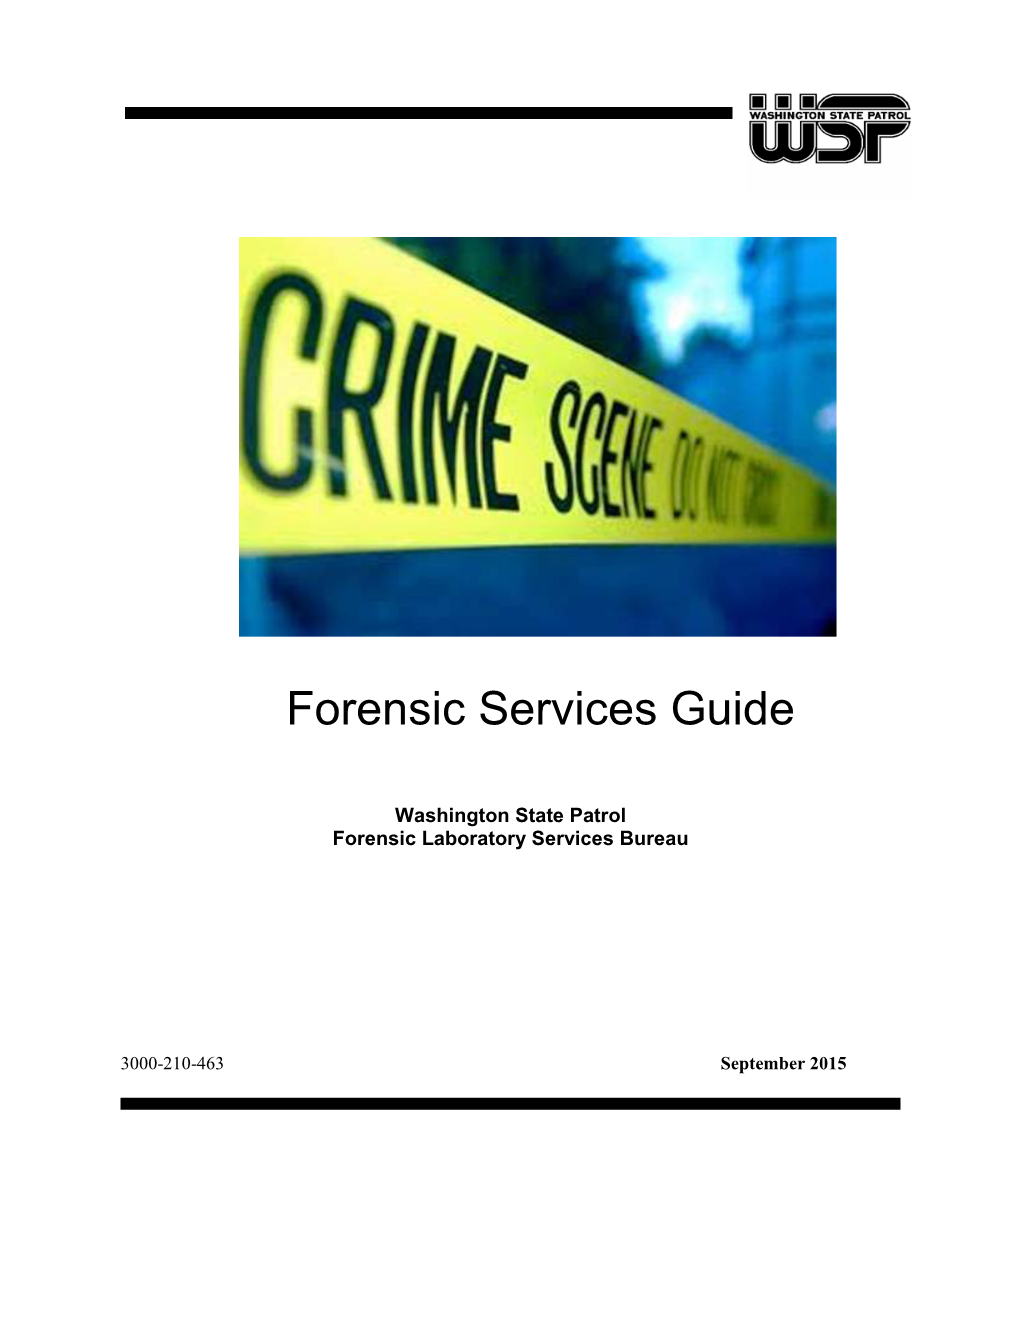 Washington State Patrol Forensic Services Guide